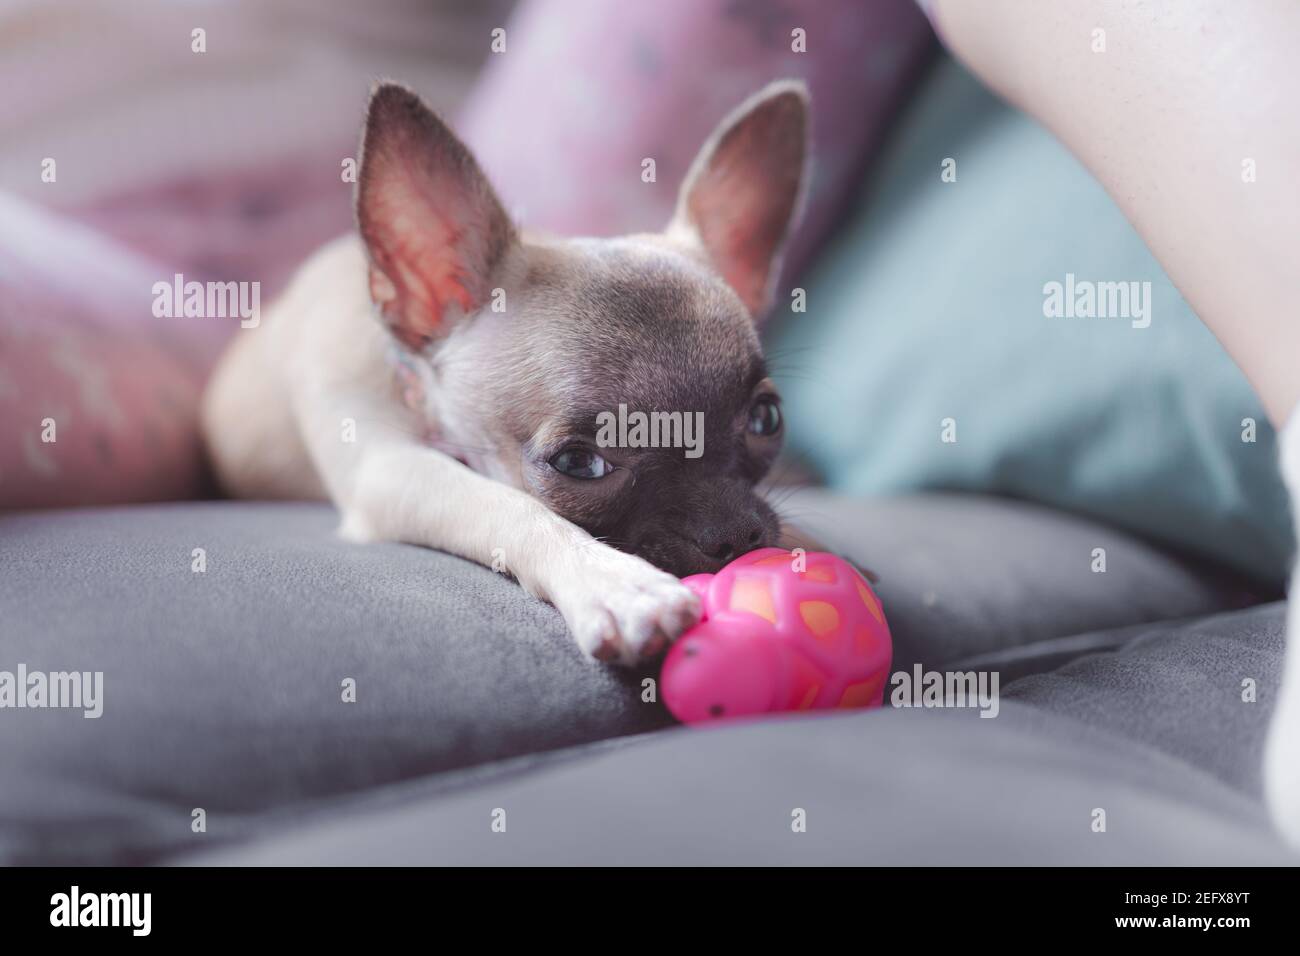 Closeup of a small chihuahua dog lying on a couch biting a toy Stock Photo